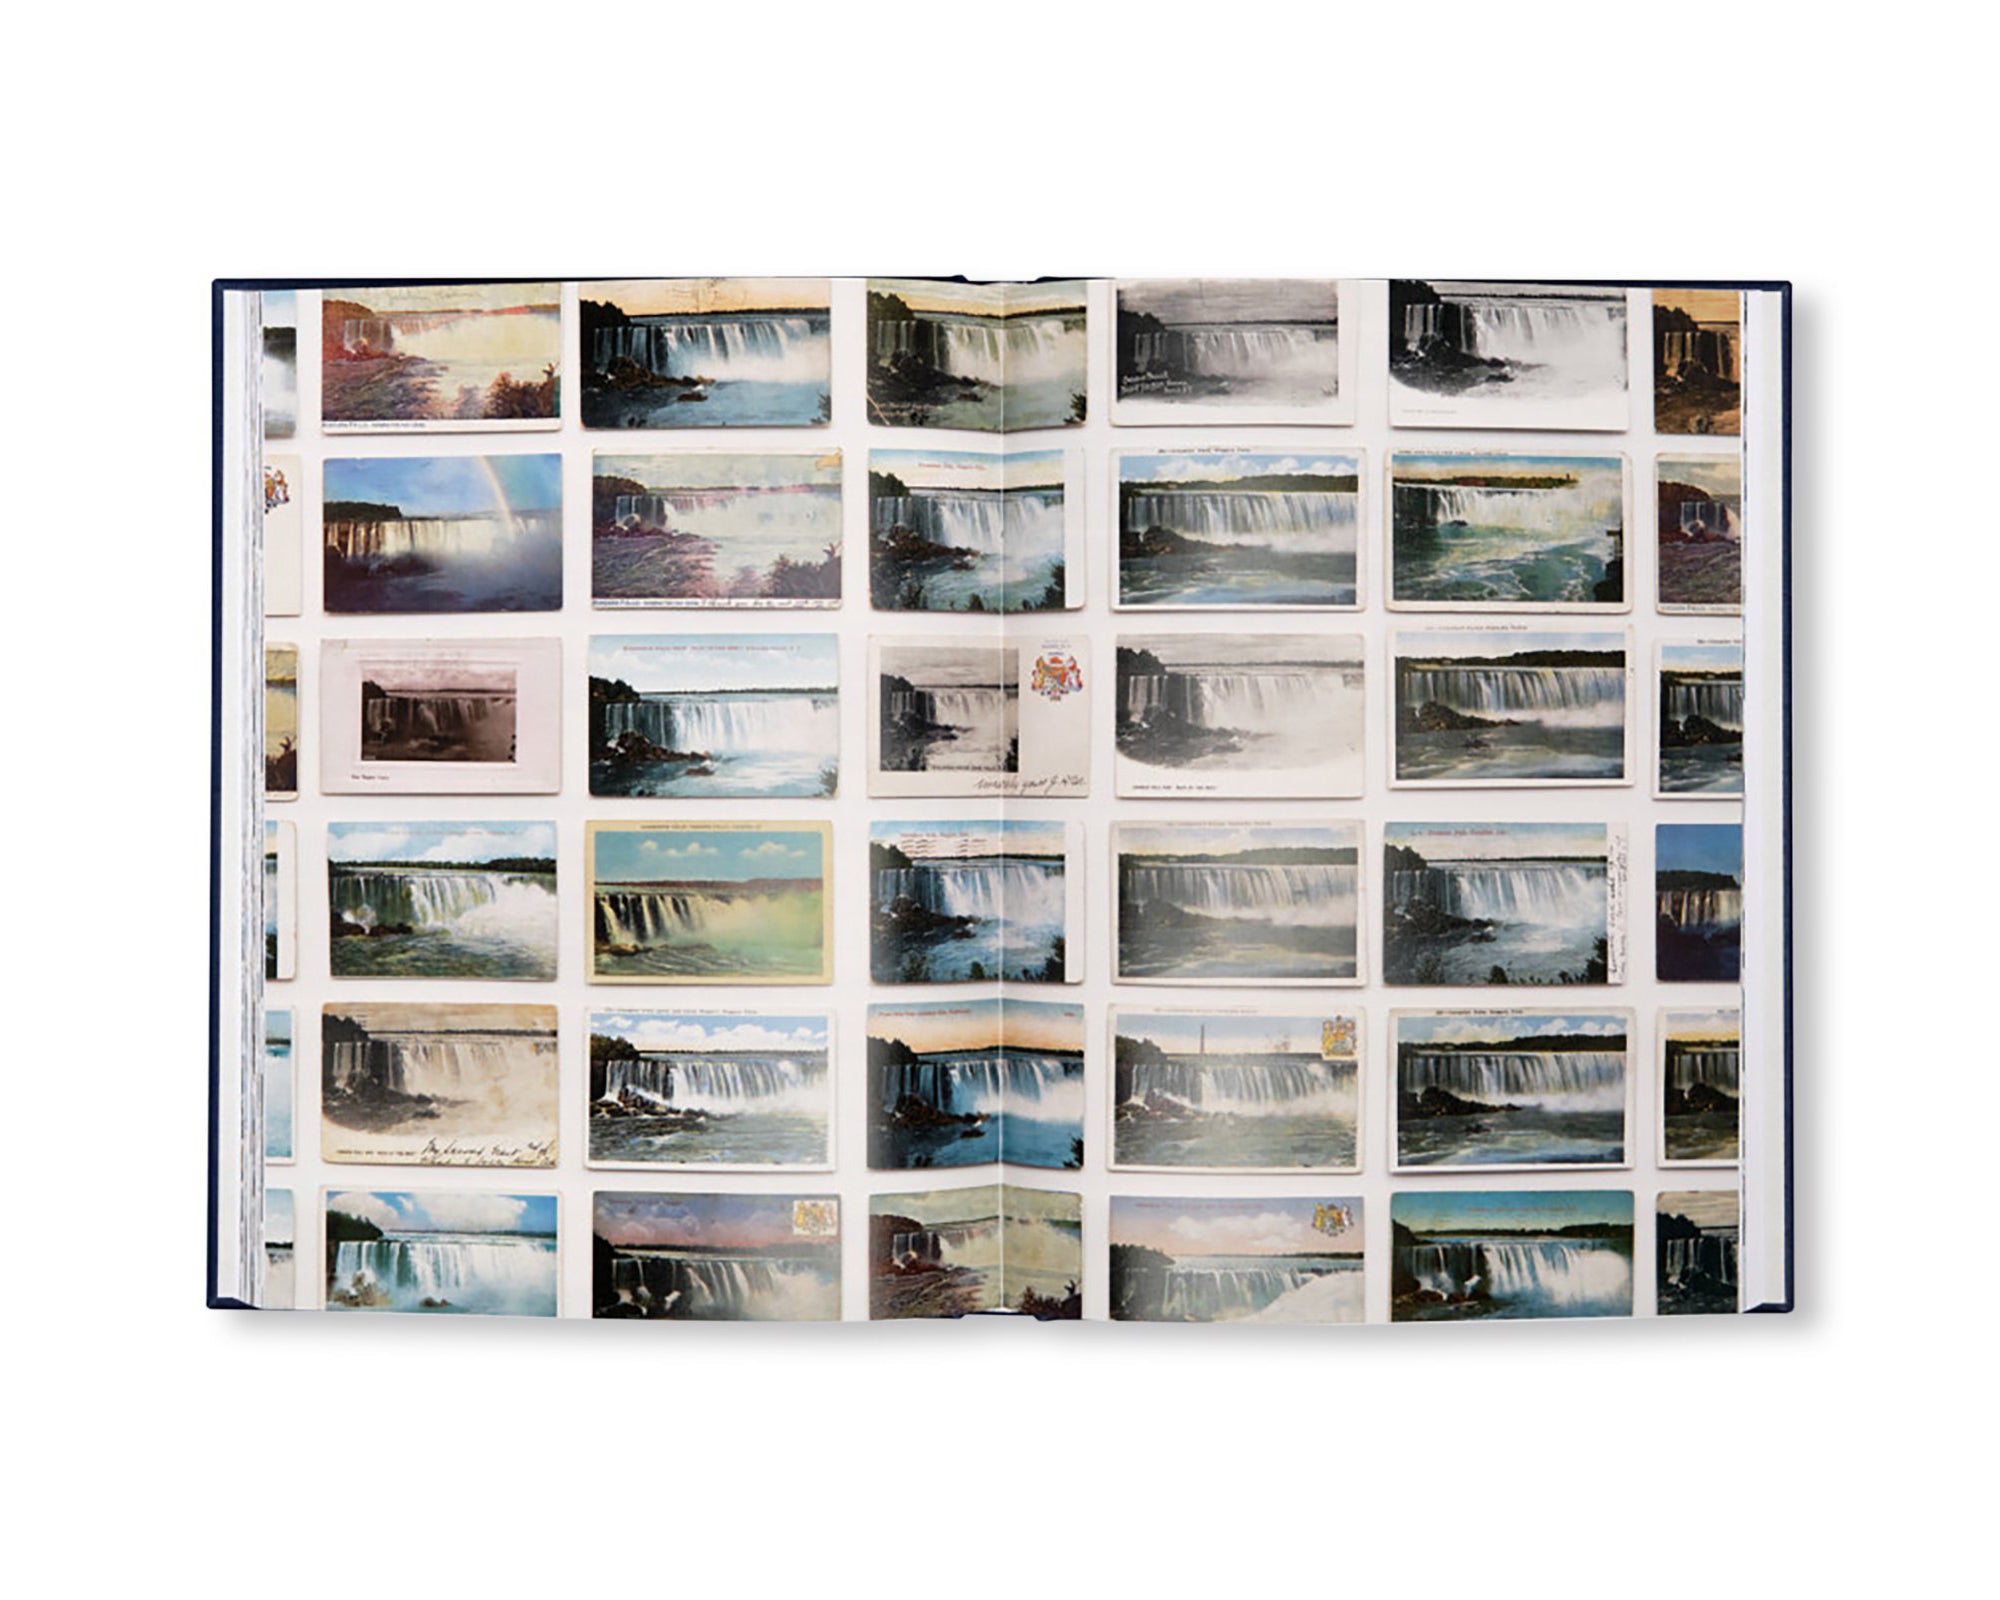 YOU SEE I AM HERE AFTER ALL by Zoe Leonard